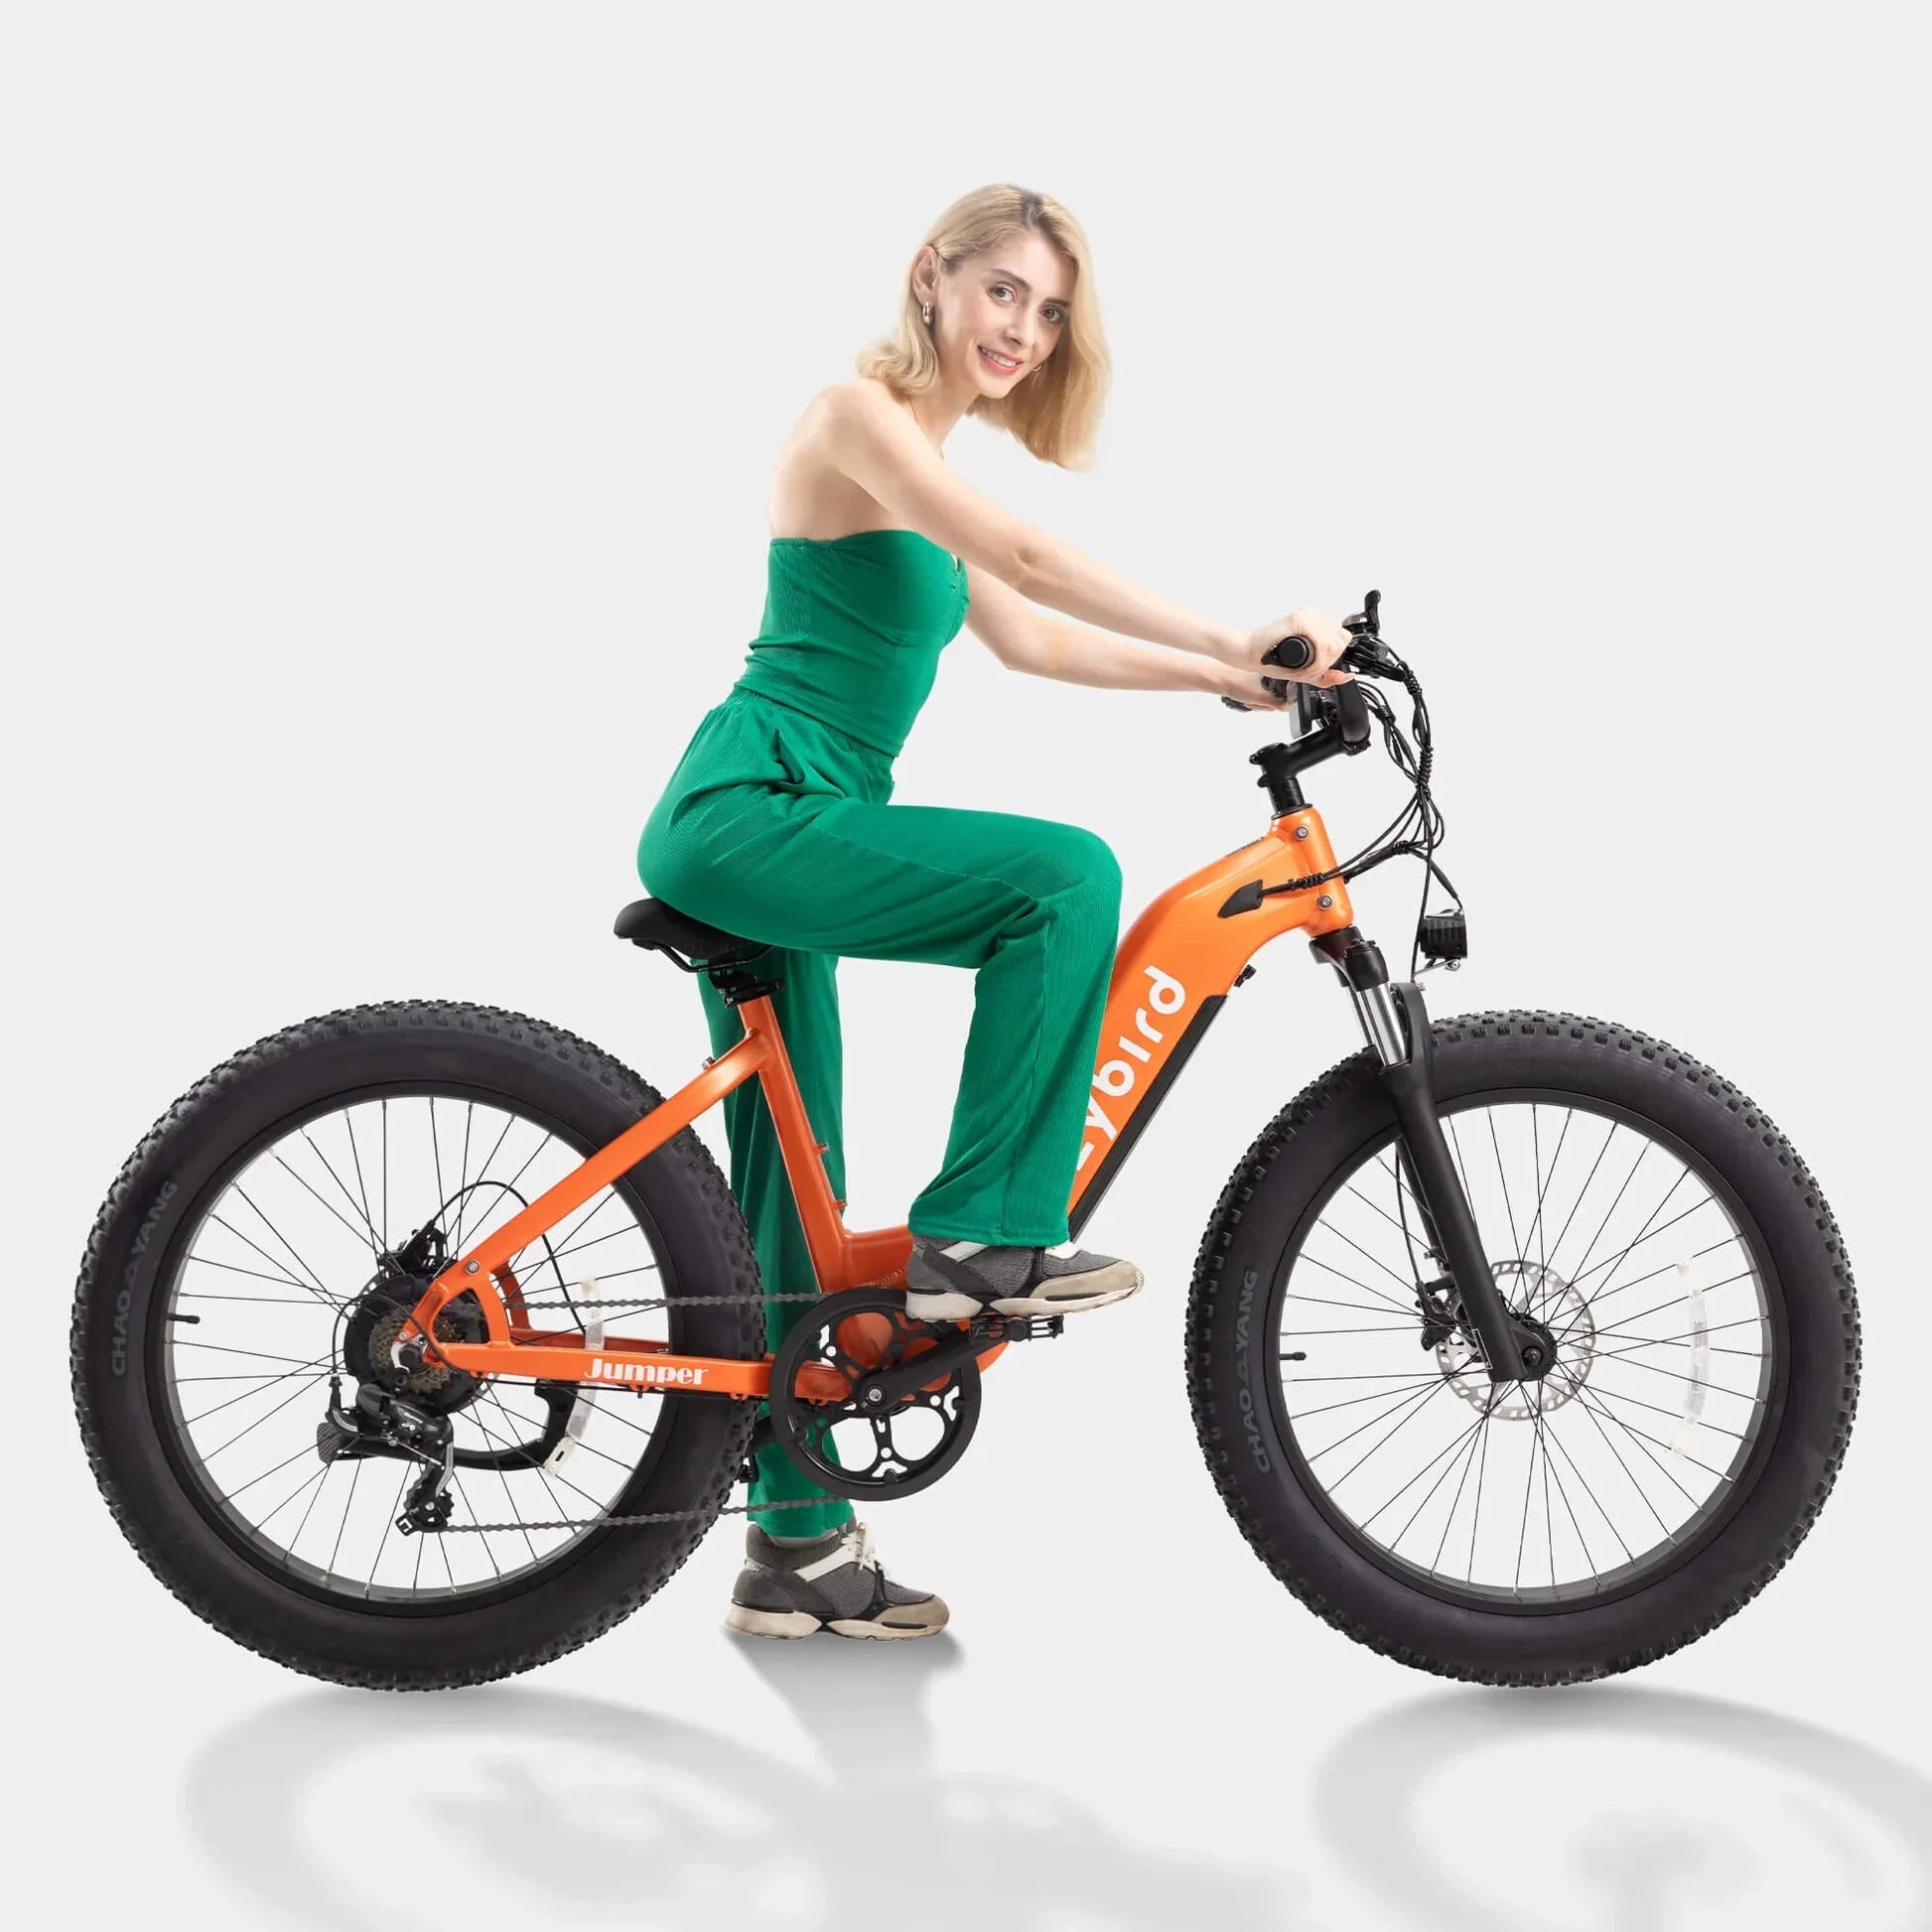 Crazybird Jumper E-Bike - Pogo cycles UK -cycle to work scheme available